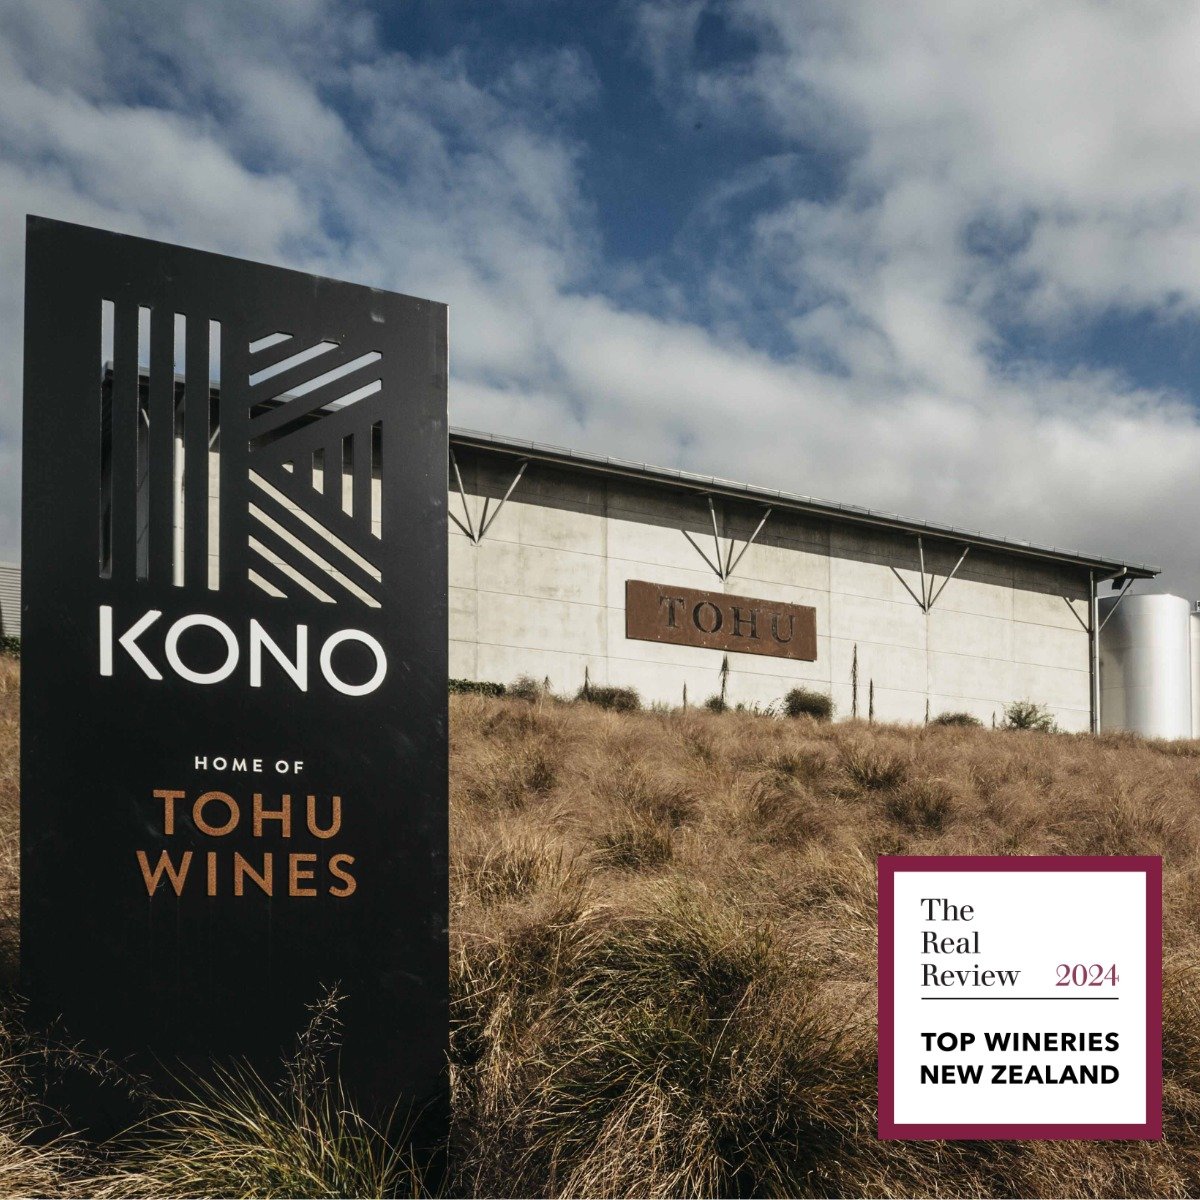 We are proud to announce that Tohu is one of The Real Review Top Wineries of New Zealand 2024!

Established in 1998 as the world's first Māori-owned wine business, we're grateful to share the wonderful kaupapa of Tohu Wines with the rest of the world